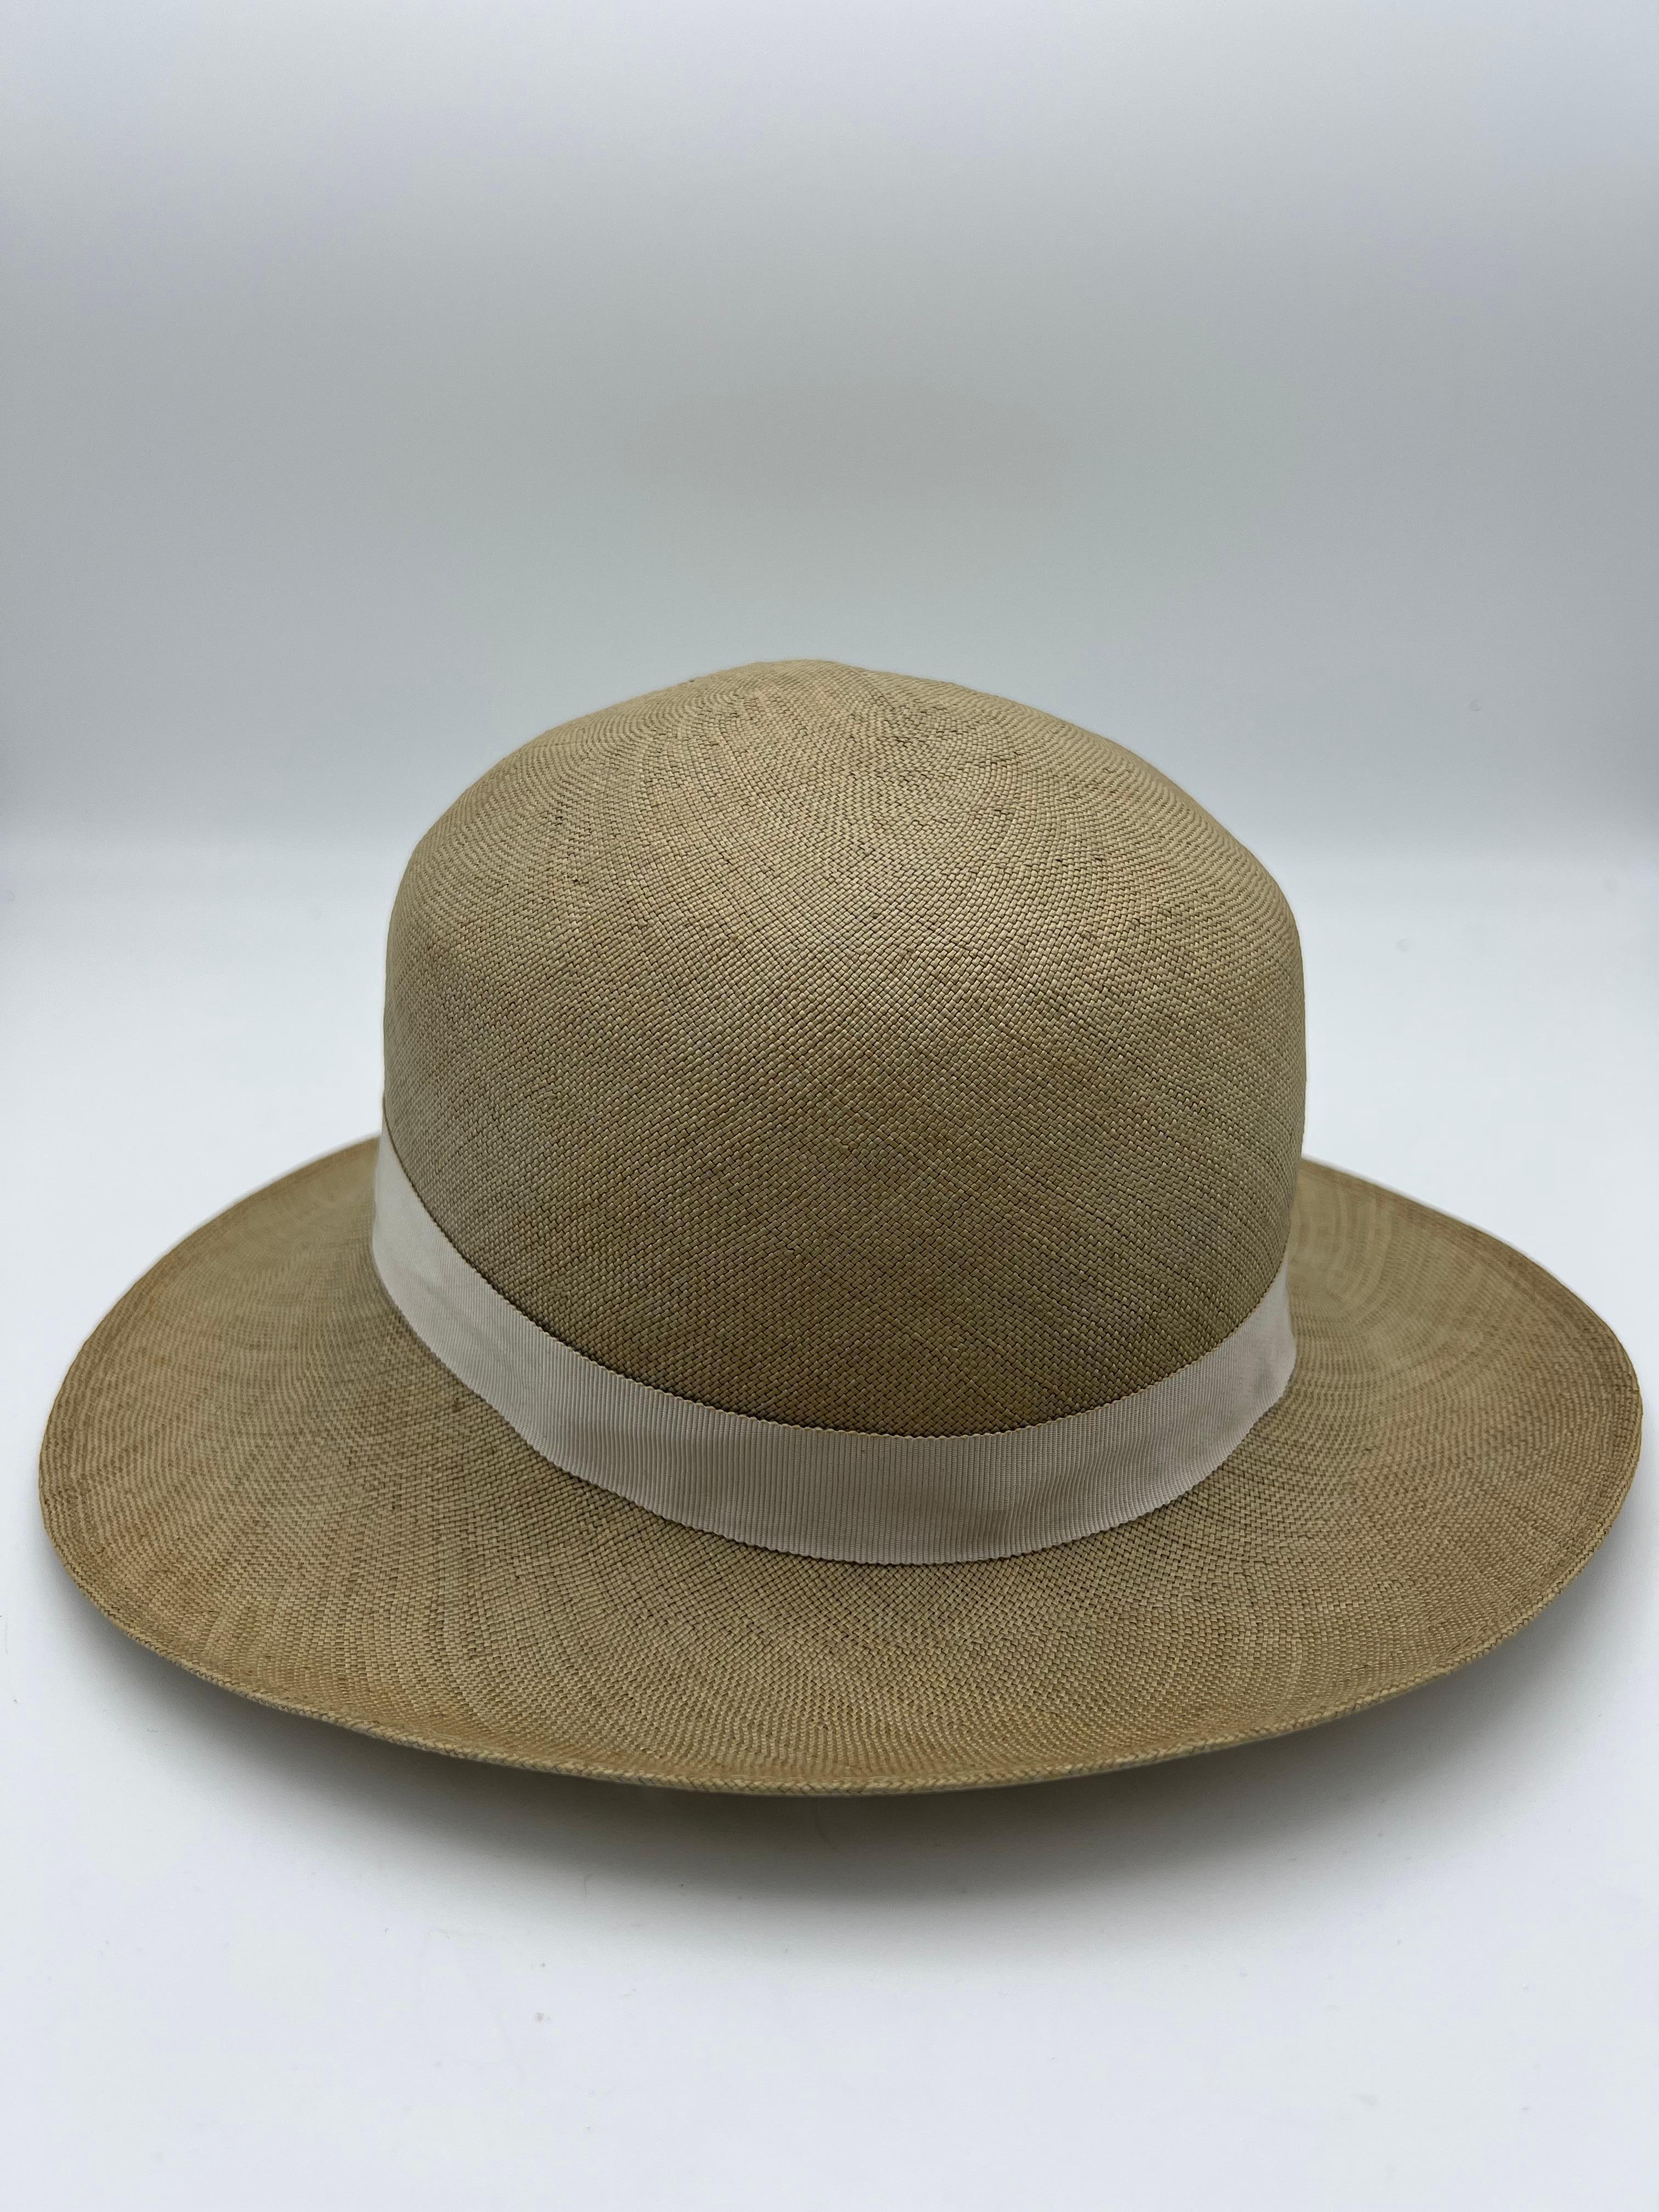 Vintage Yves Saint Laurent Straw Hat In Excellent Condition For Sale In Beverly Hills, CA